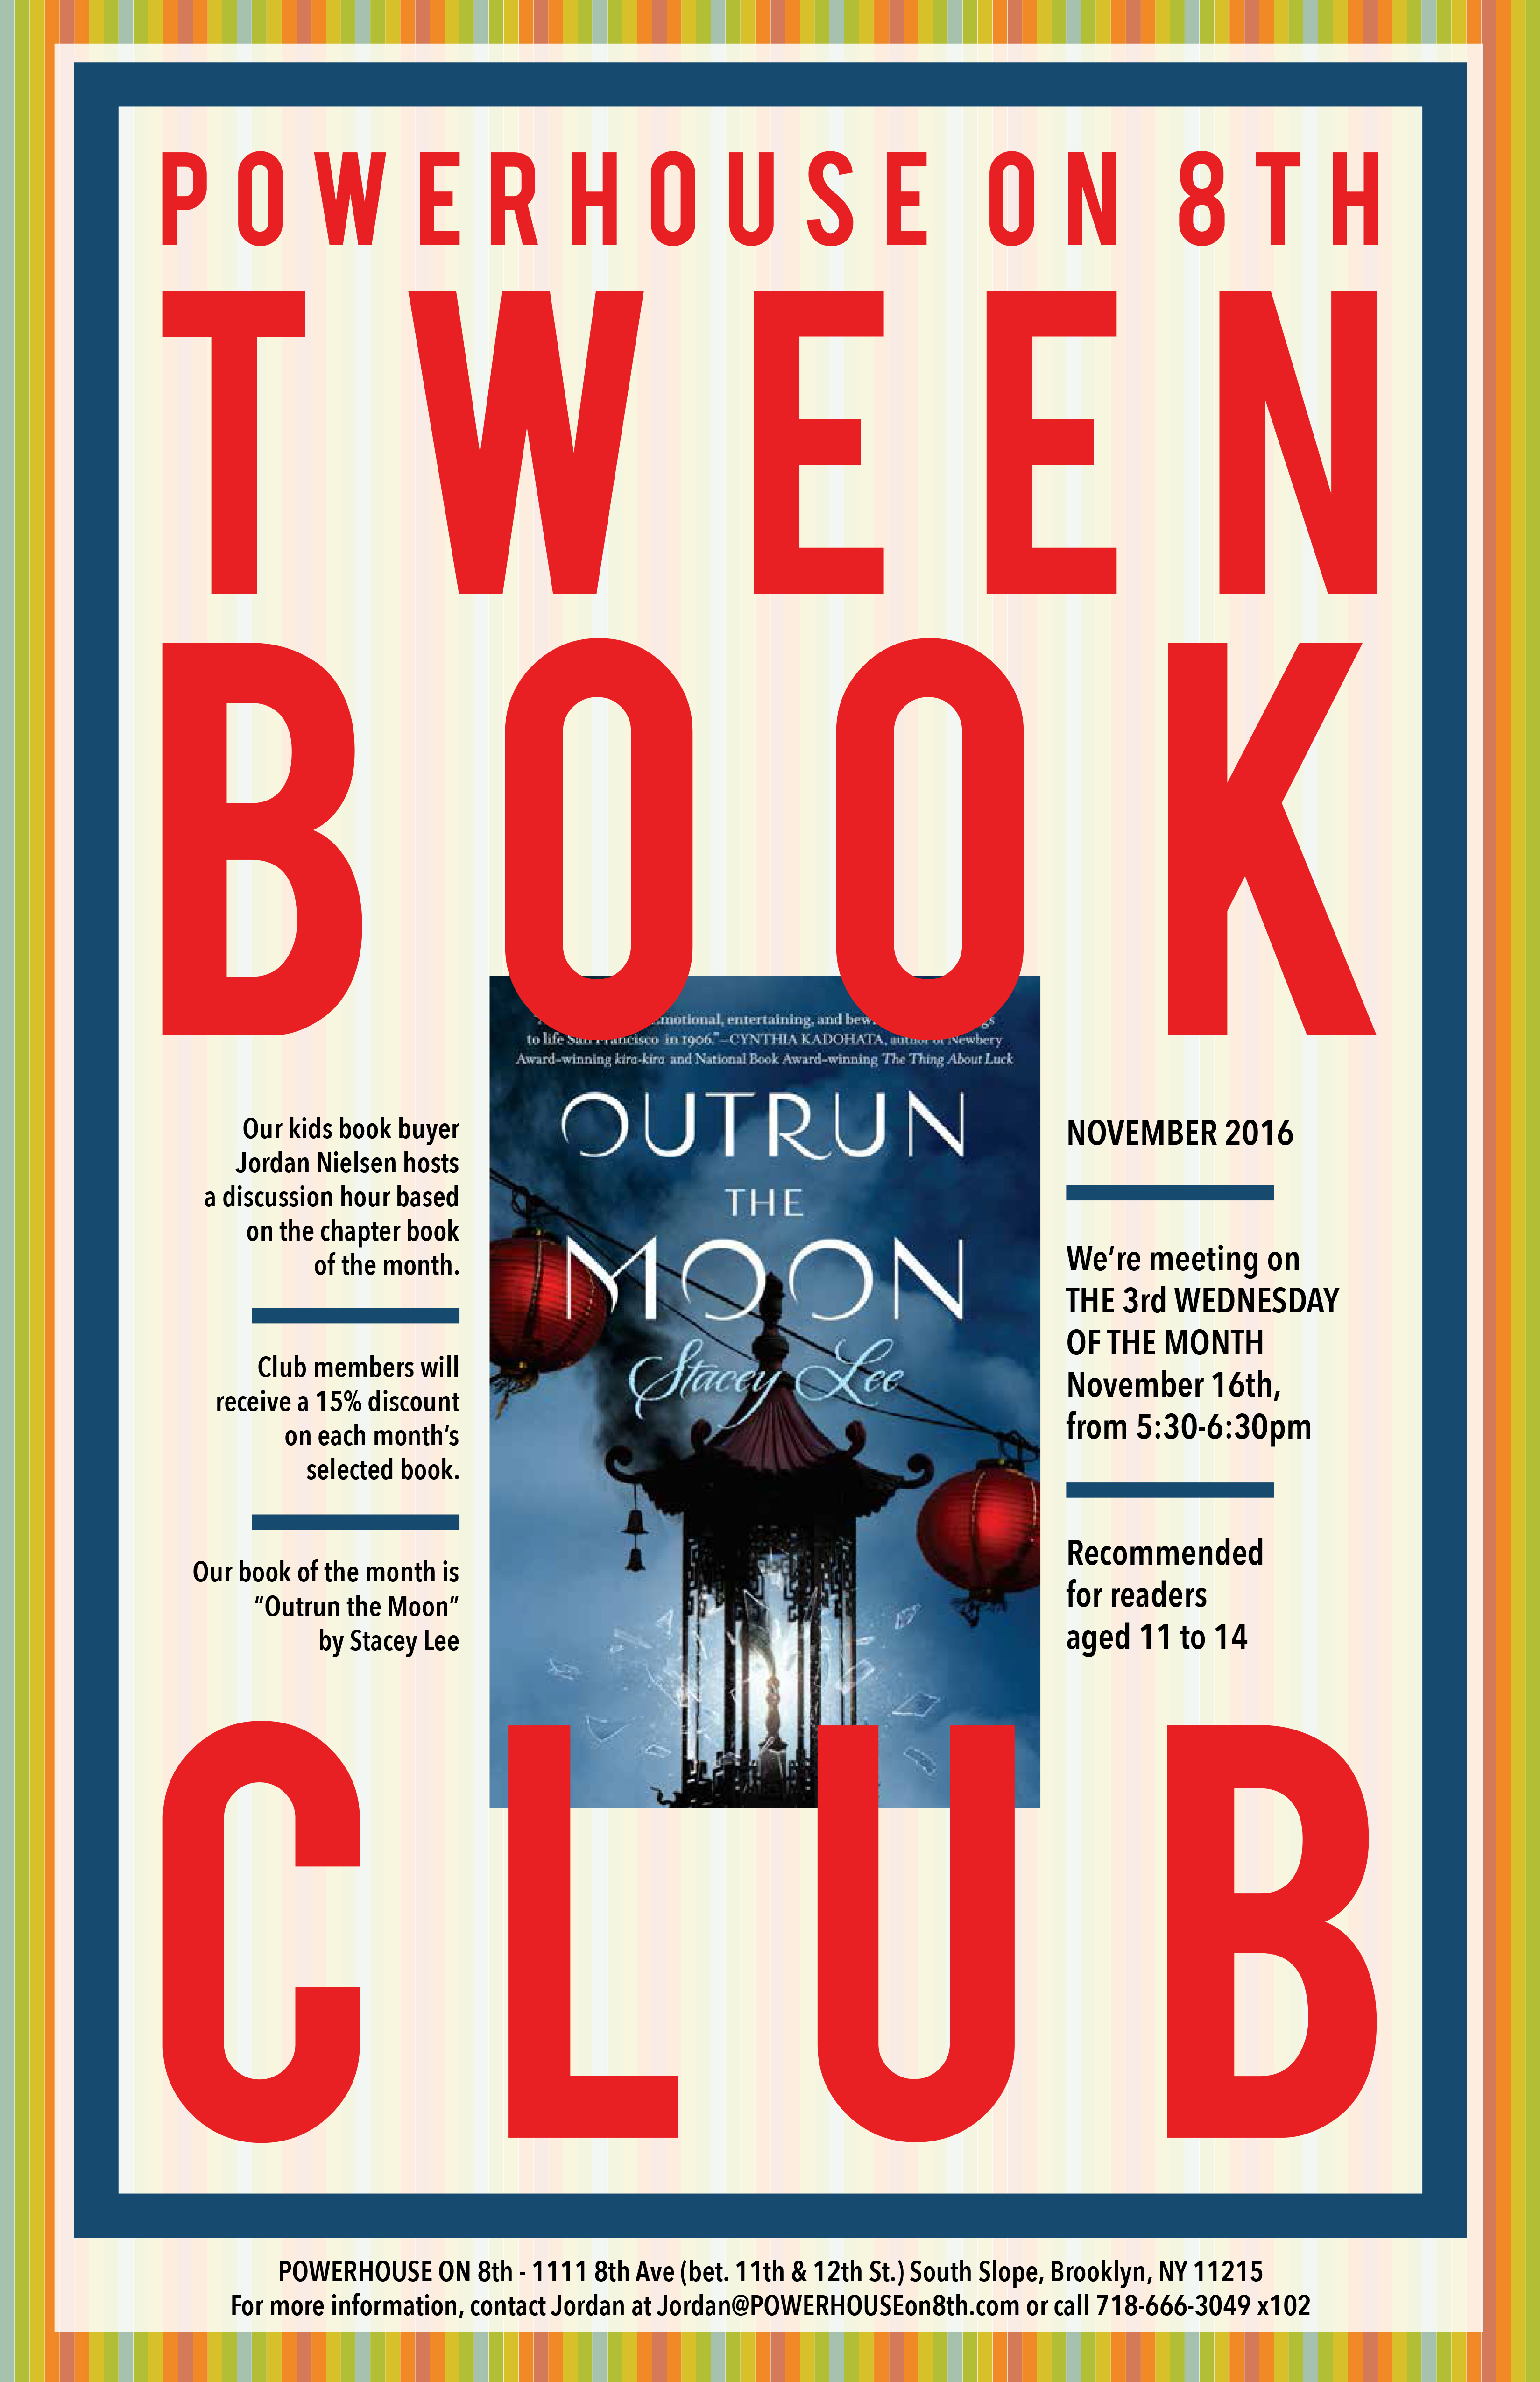 Tween Book Club: Outrun the Moon by Stacey Lee